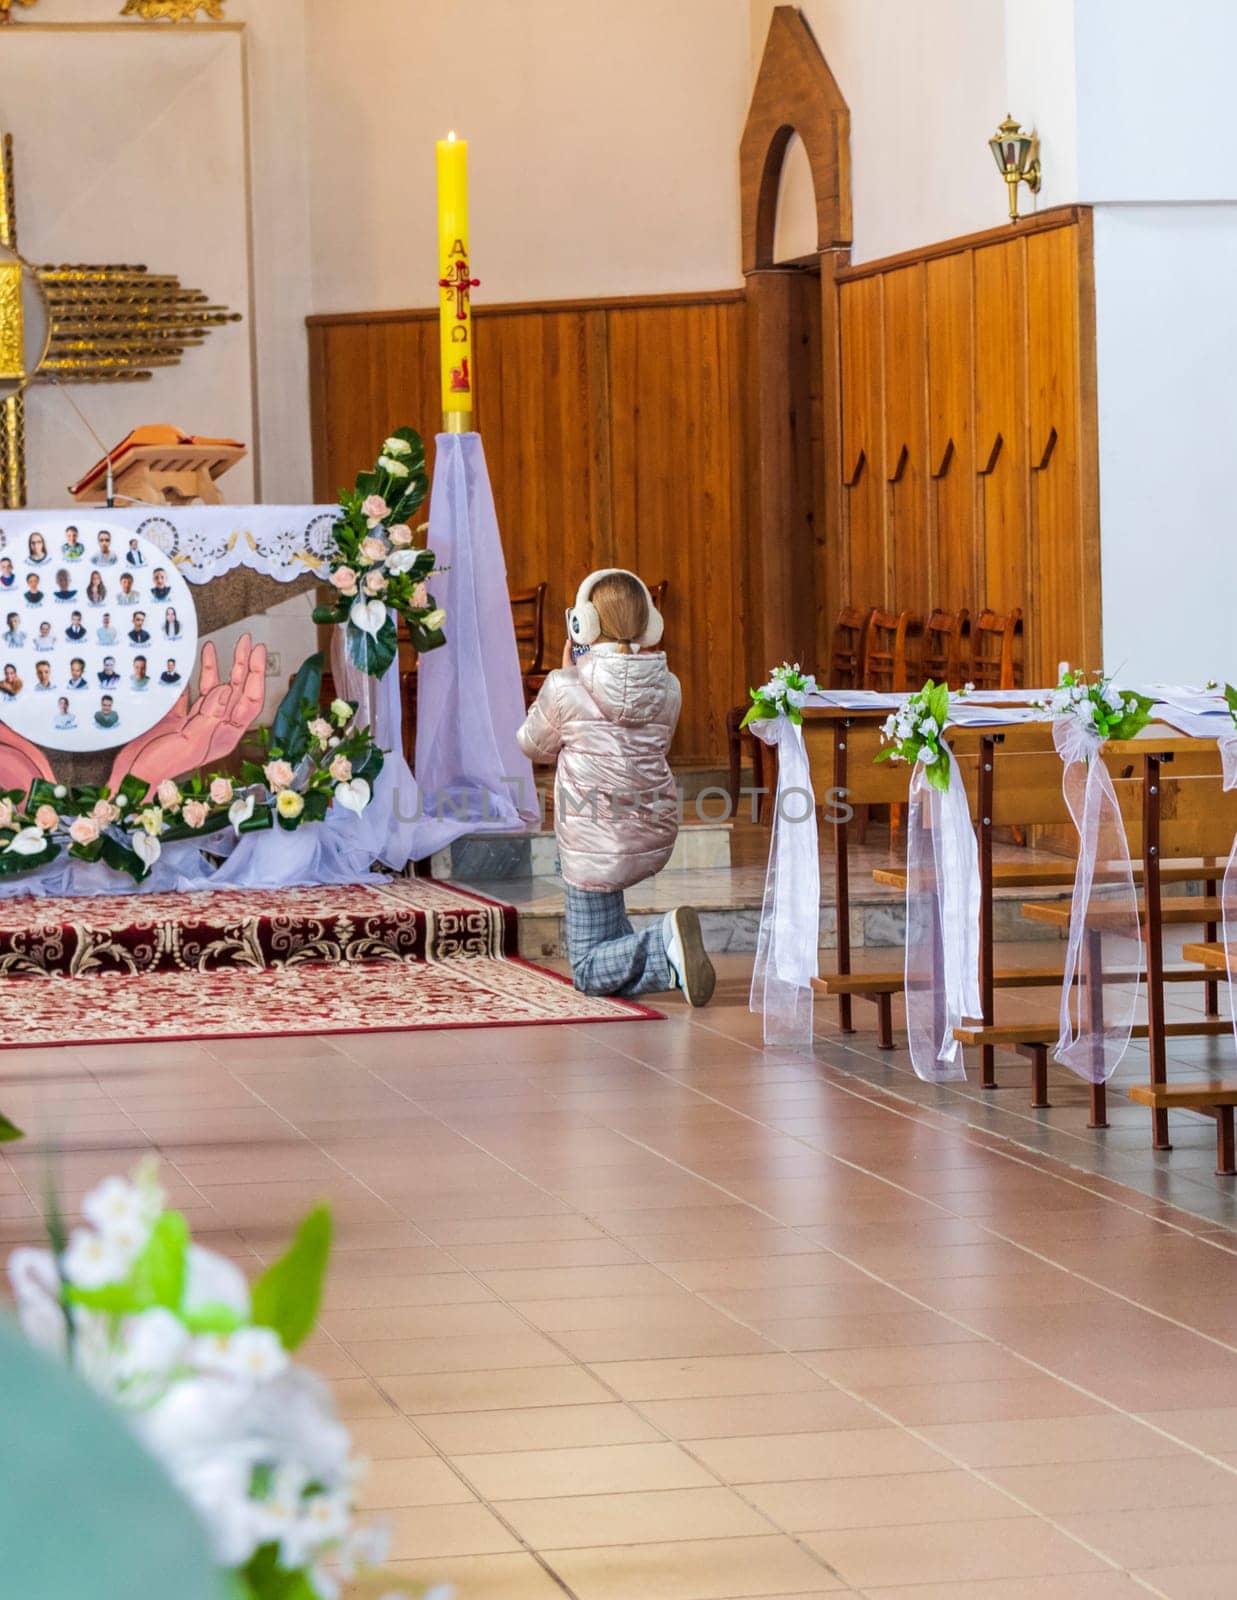 Shot of girl, wearing headphones, kneeling at the altar at Roman catholic church, says prayer and taking pictures of the altar